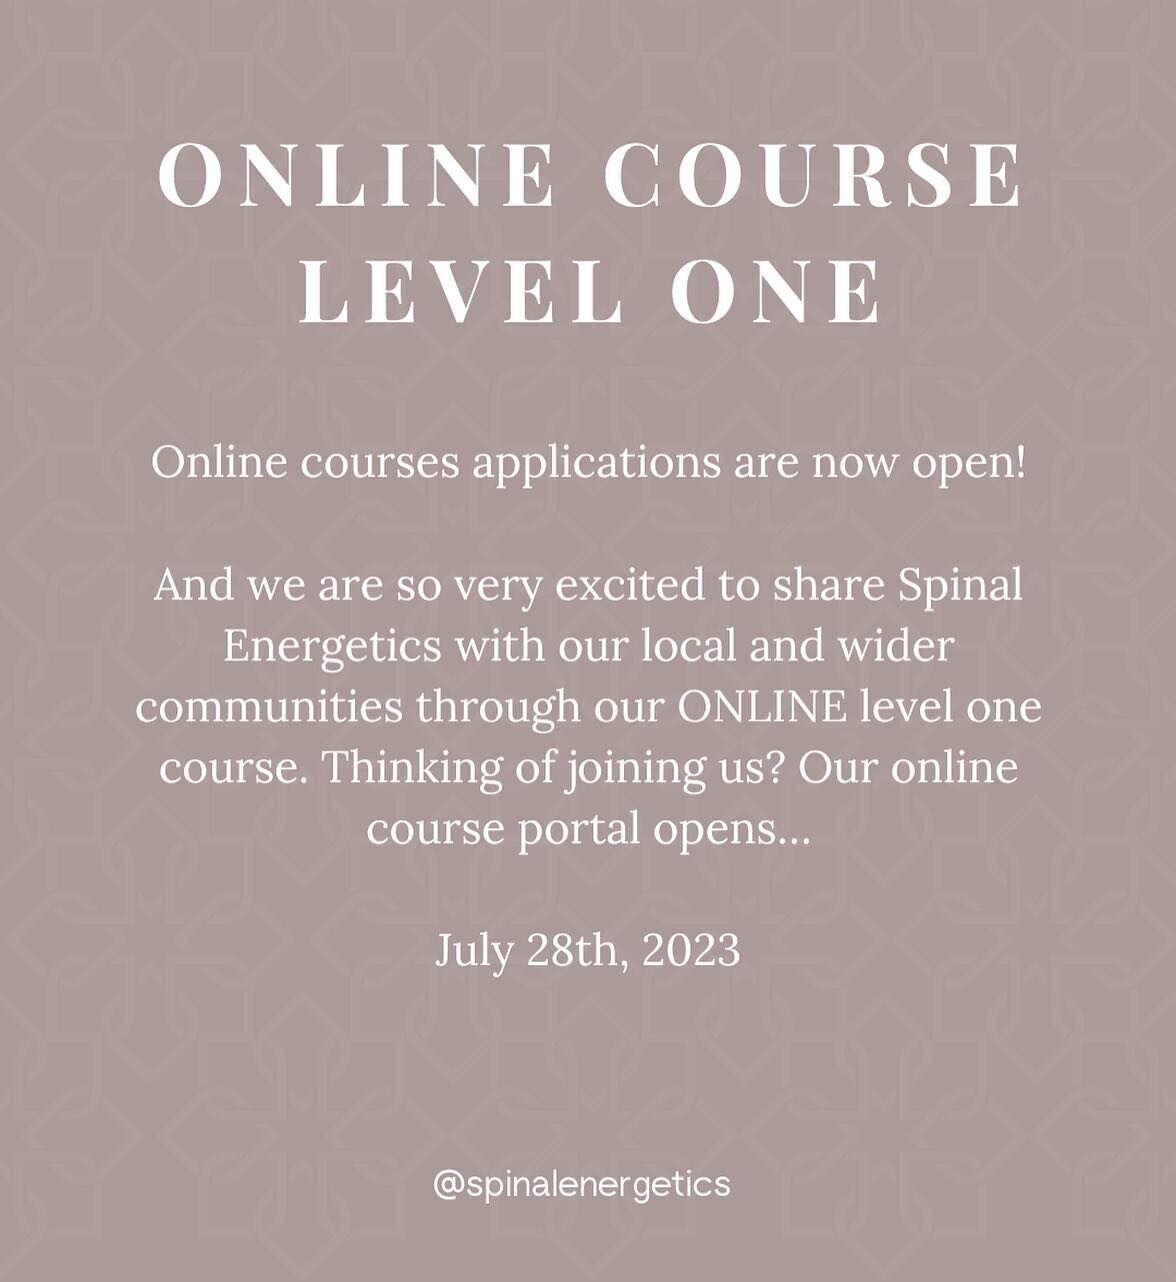 Our Spinal Energetics level one
ONLINE course is here! 🚨 

Our ONLINE level one Spinal Energetics course is designed for individuals already working or practising within the wellness space, who are ready to expand their abilities by becoming a Spina